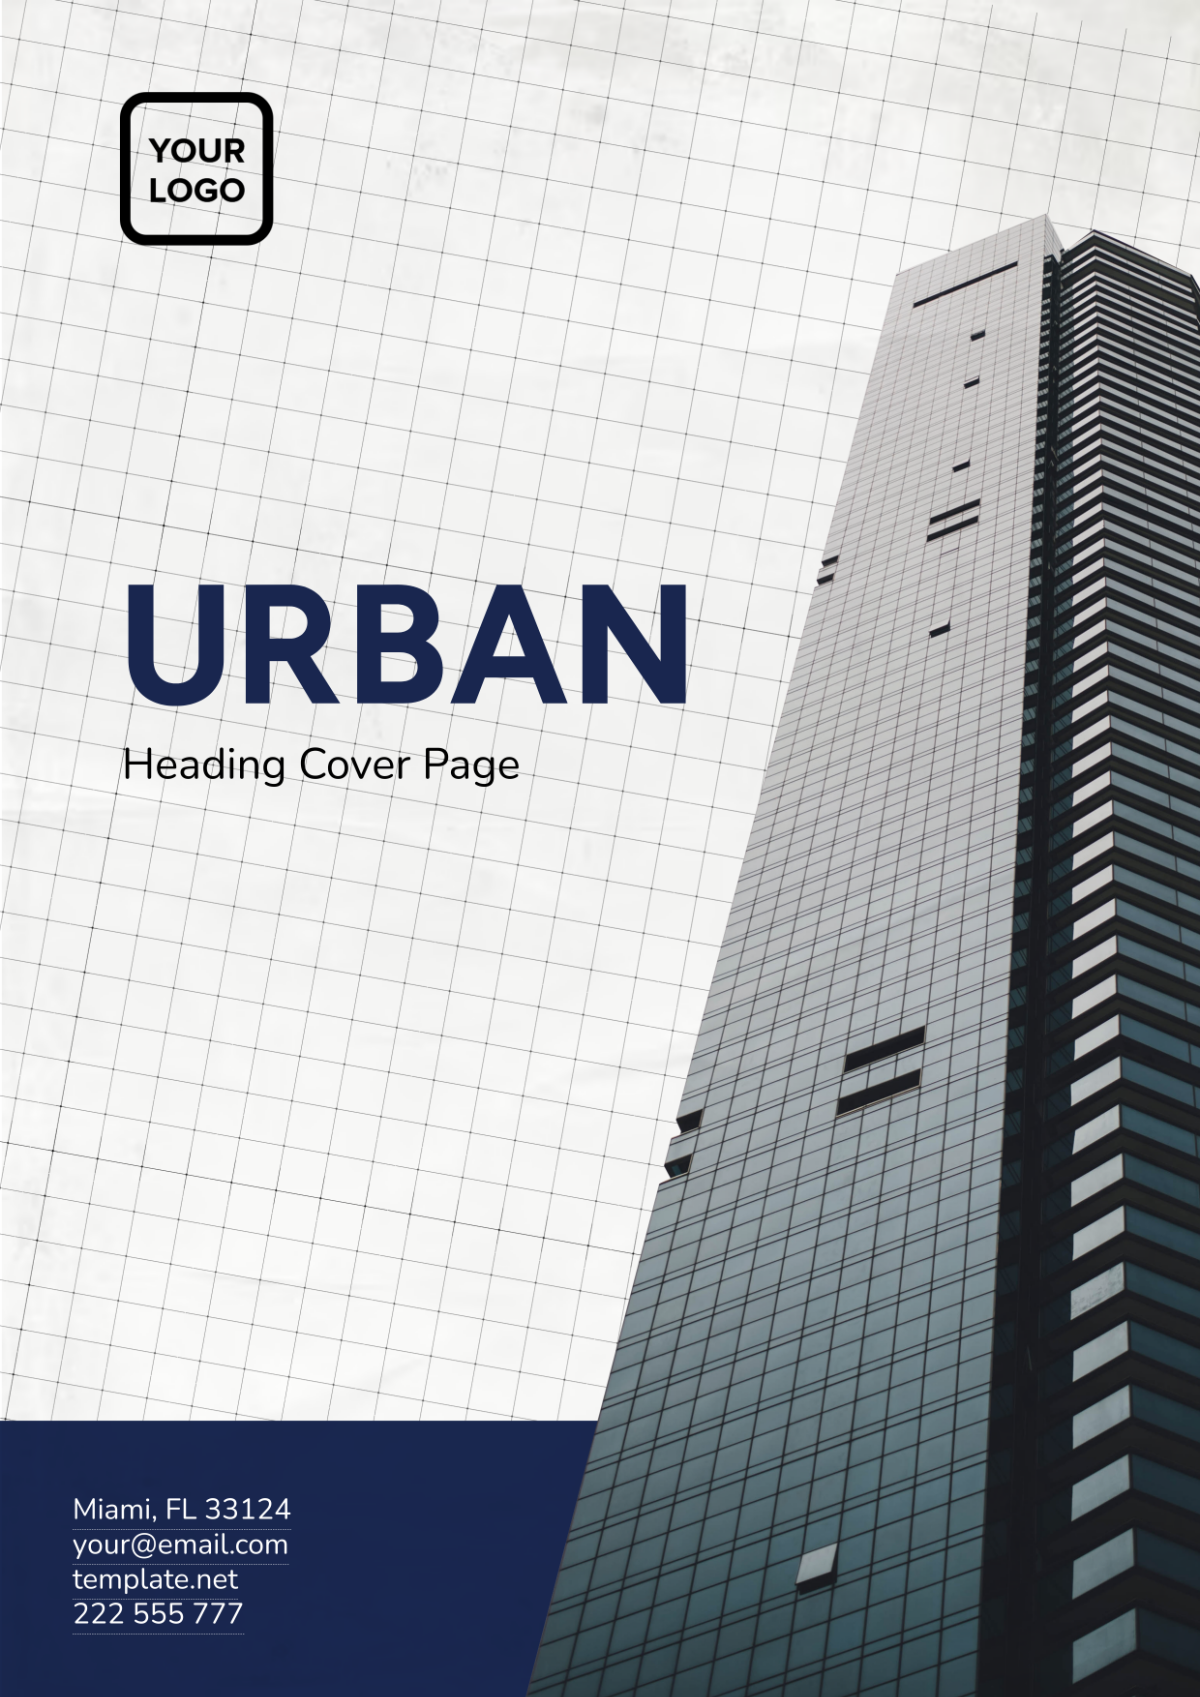 Free Urban Heading Cover Page Template